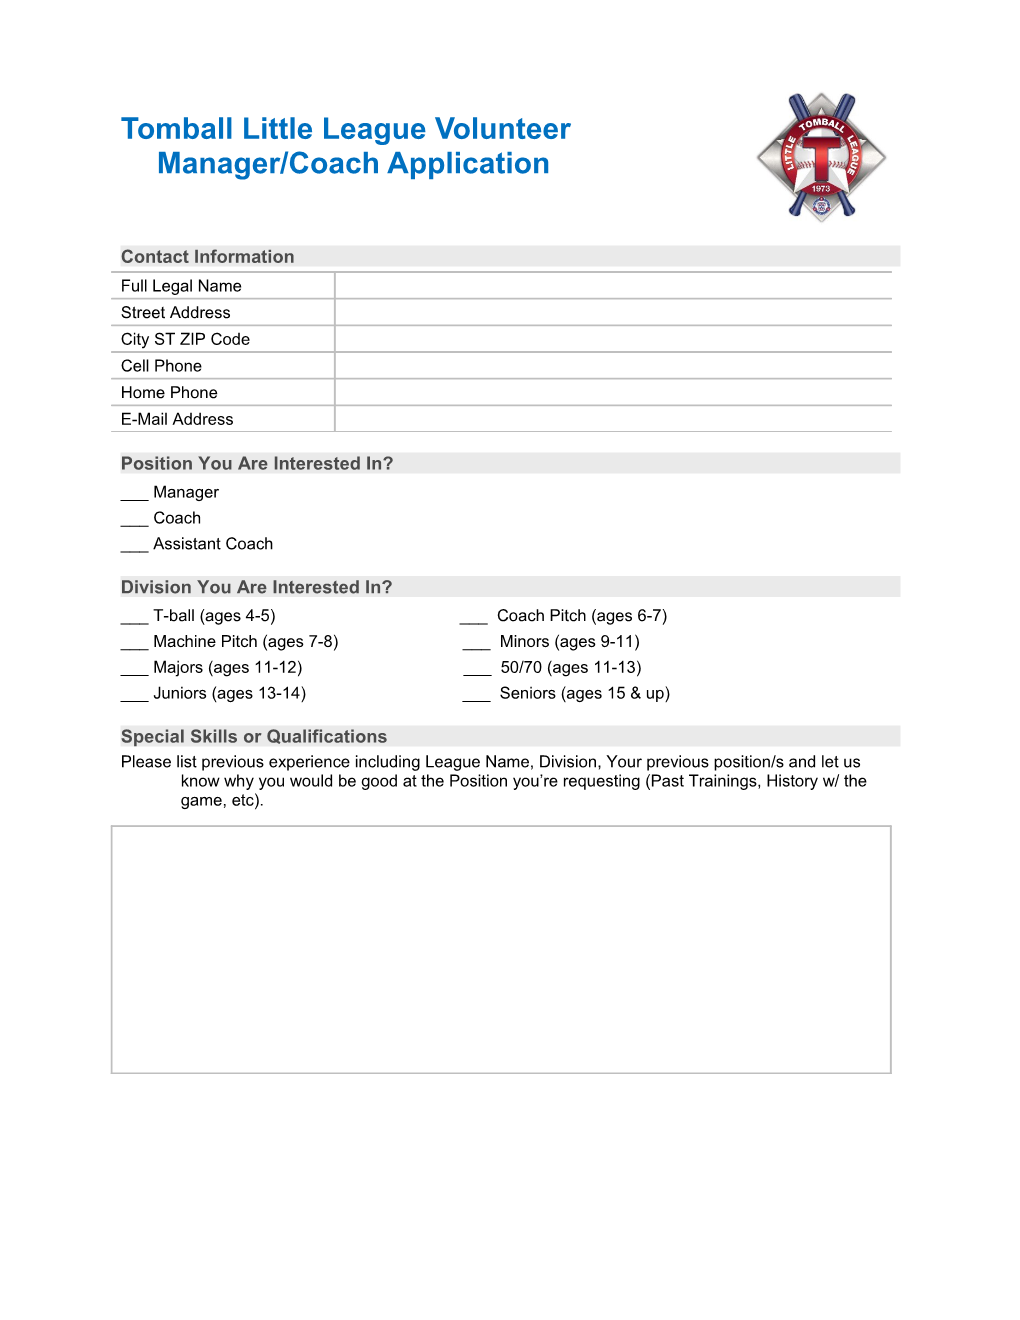 Tomball Little League Volunteer Manager/Coach Application